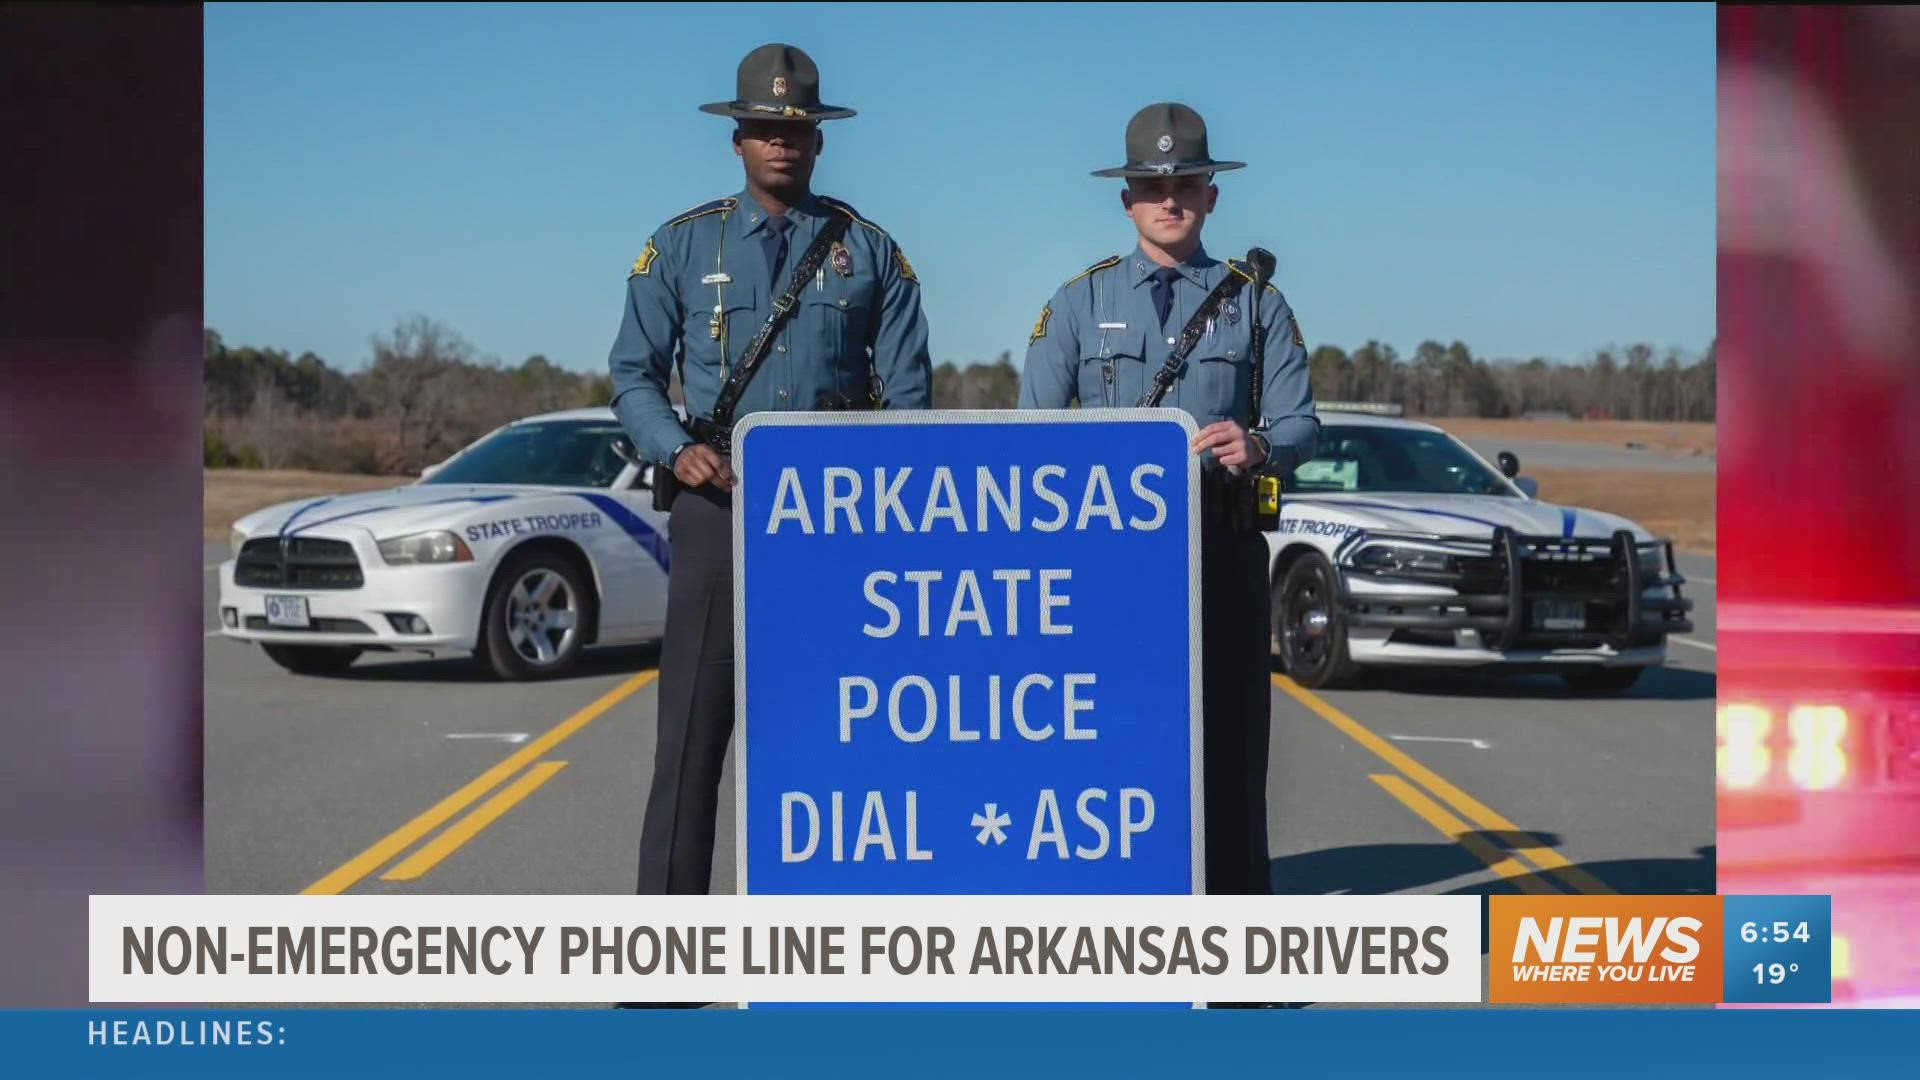 *277 is a non-emergency phone line that can be used by motorists across Arkansas who are stranded, lost or have safety concerns. https://bit.ly/3rSu1EX